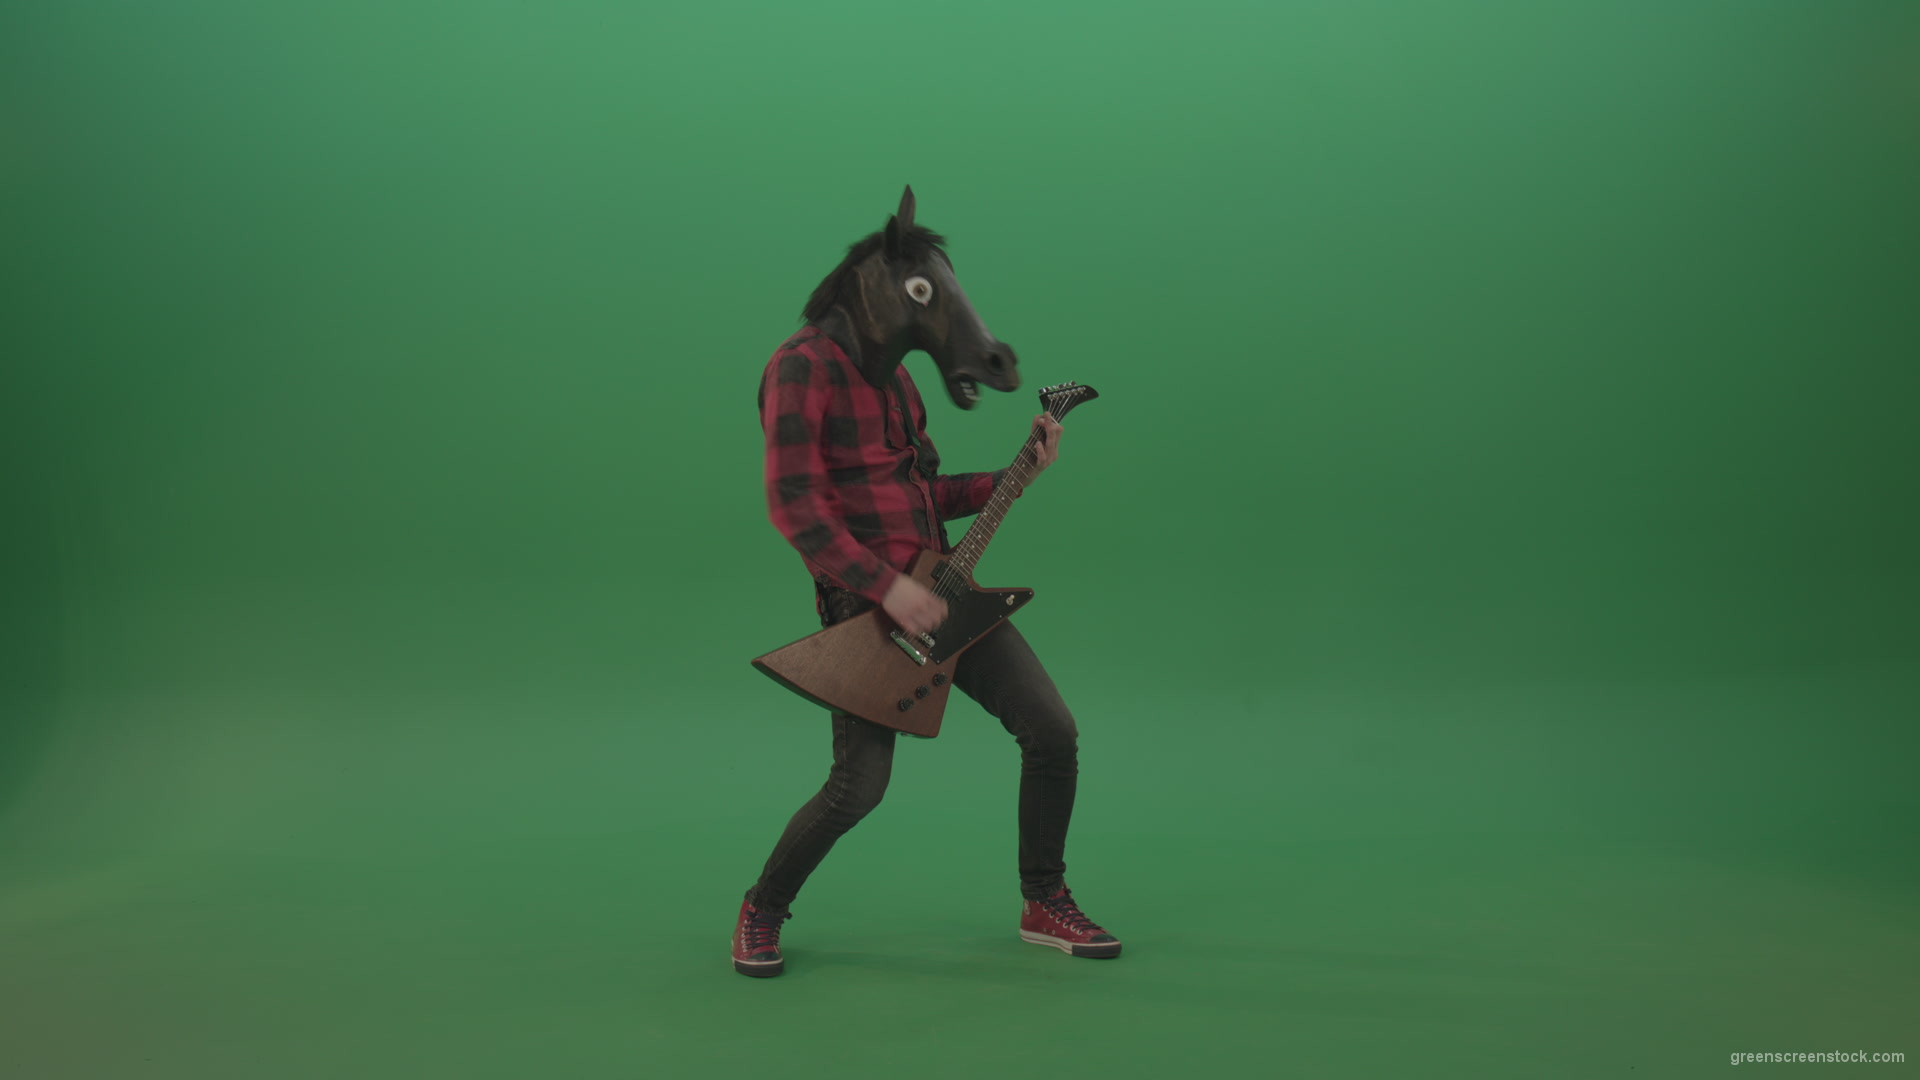 Guitarist-horse-man-with-horse-mask-head-play-guitar-on-green-screen_006 Green Screen Stock